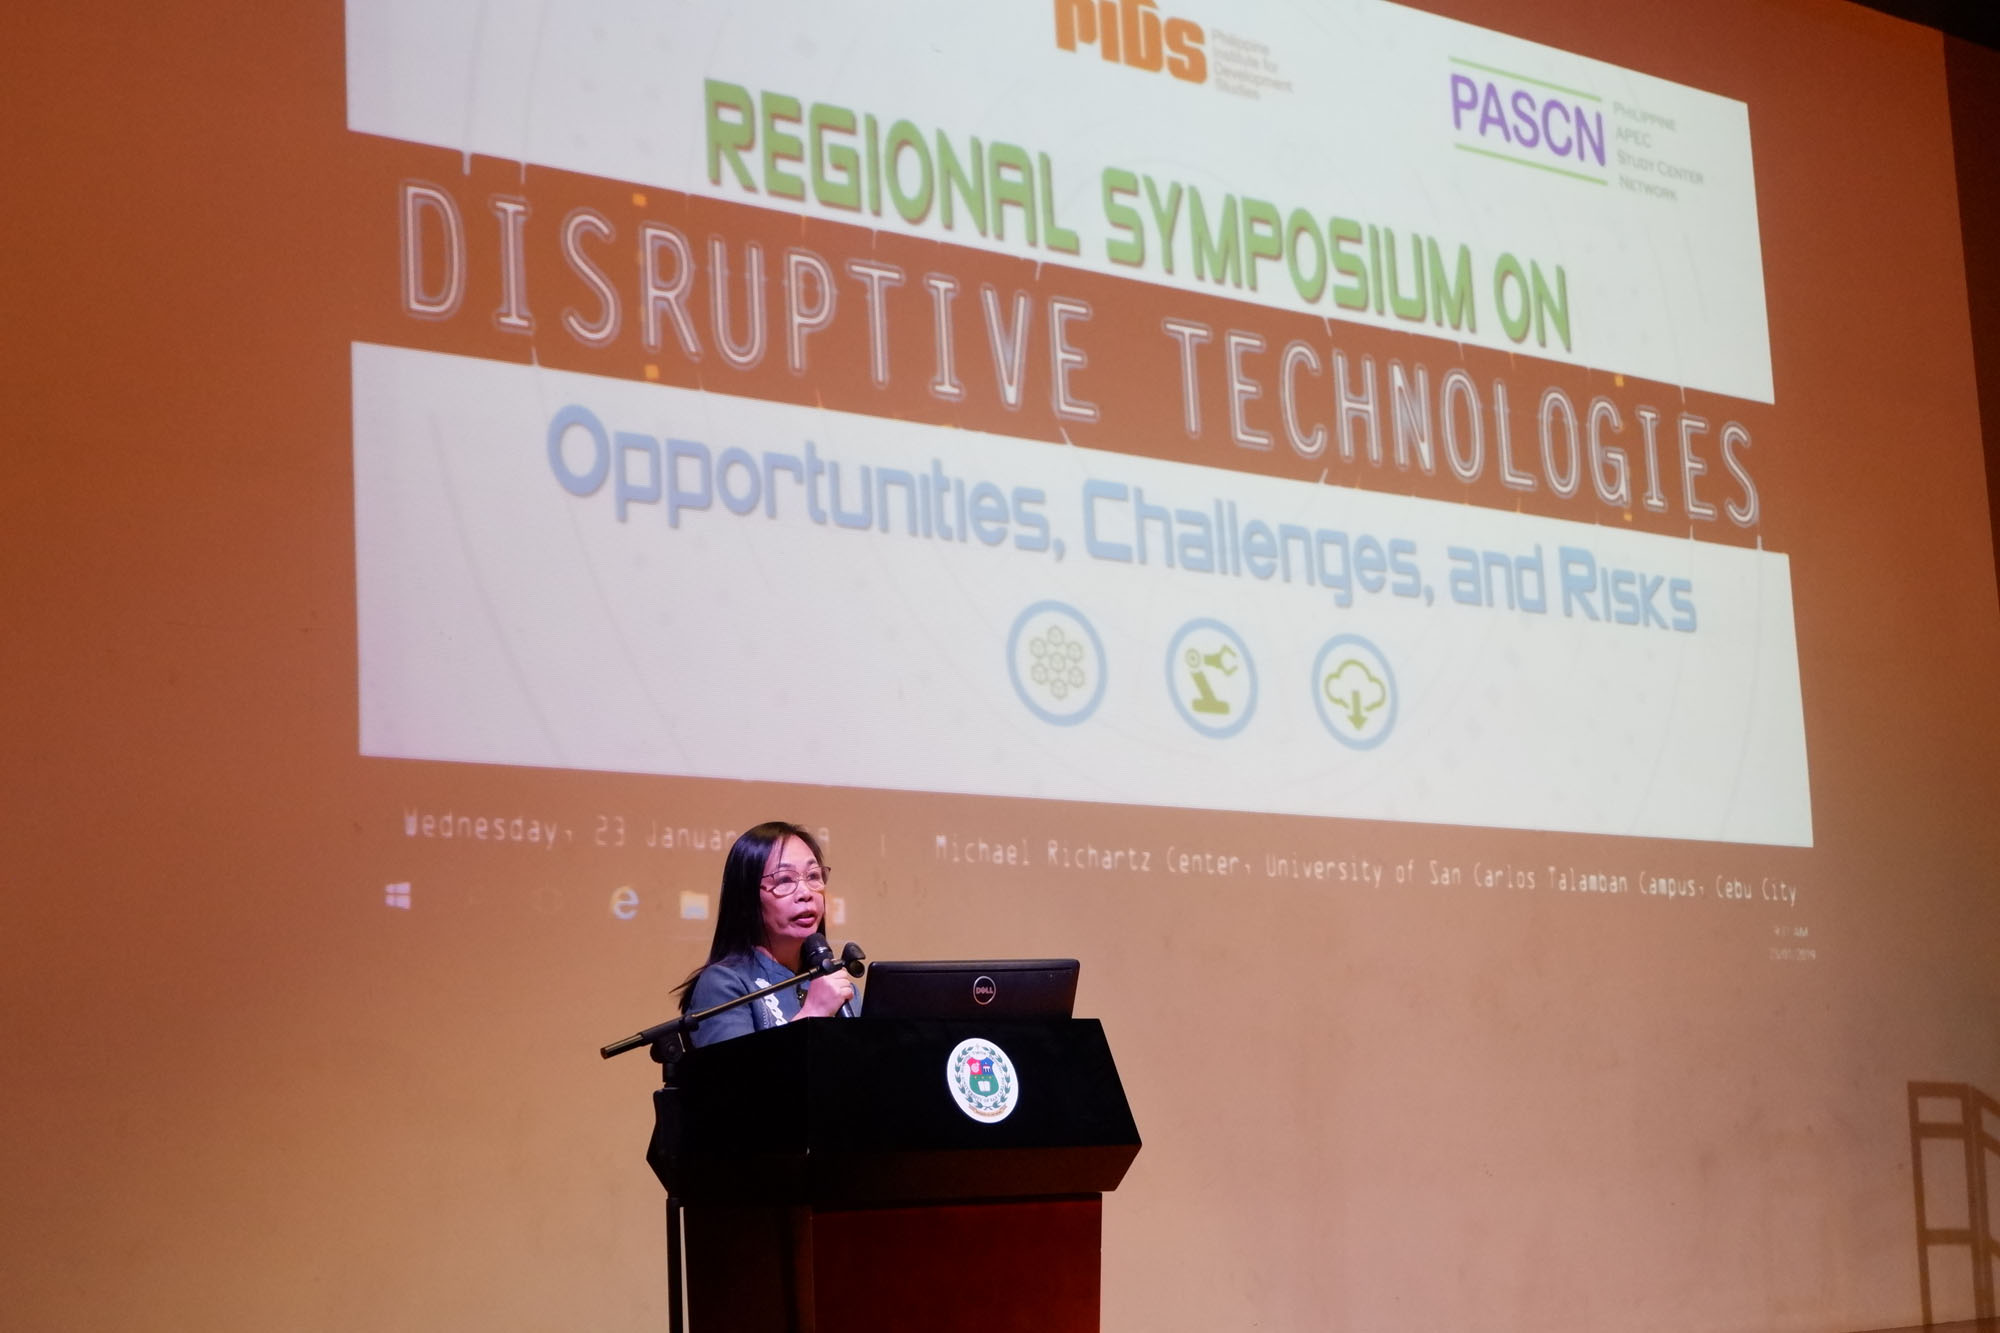 PASCN Regional Symposium on Disruptive Technologies: Opportunities, Challenges, and Risks-pascn-usc-14-20190123.jpg